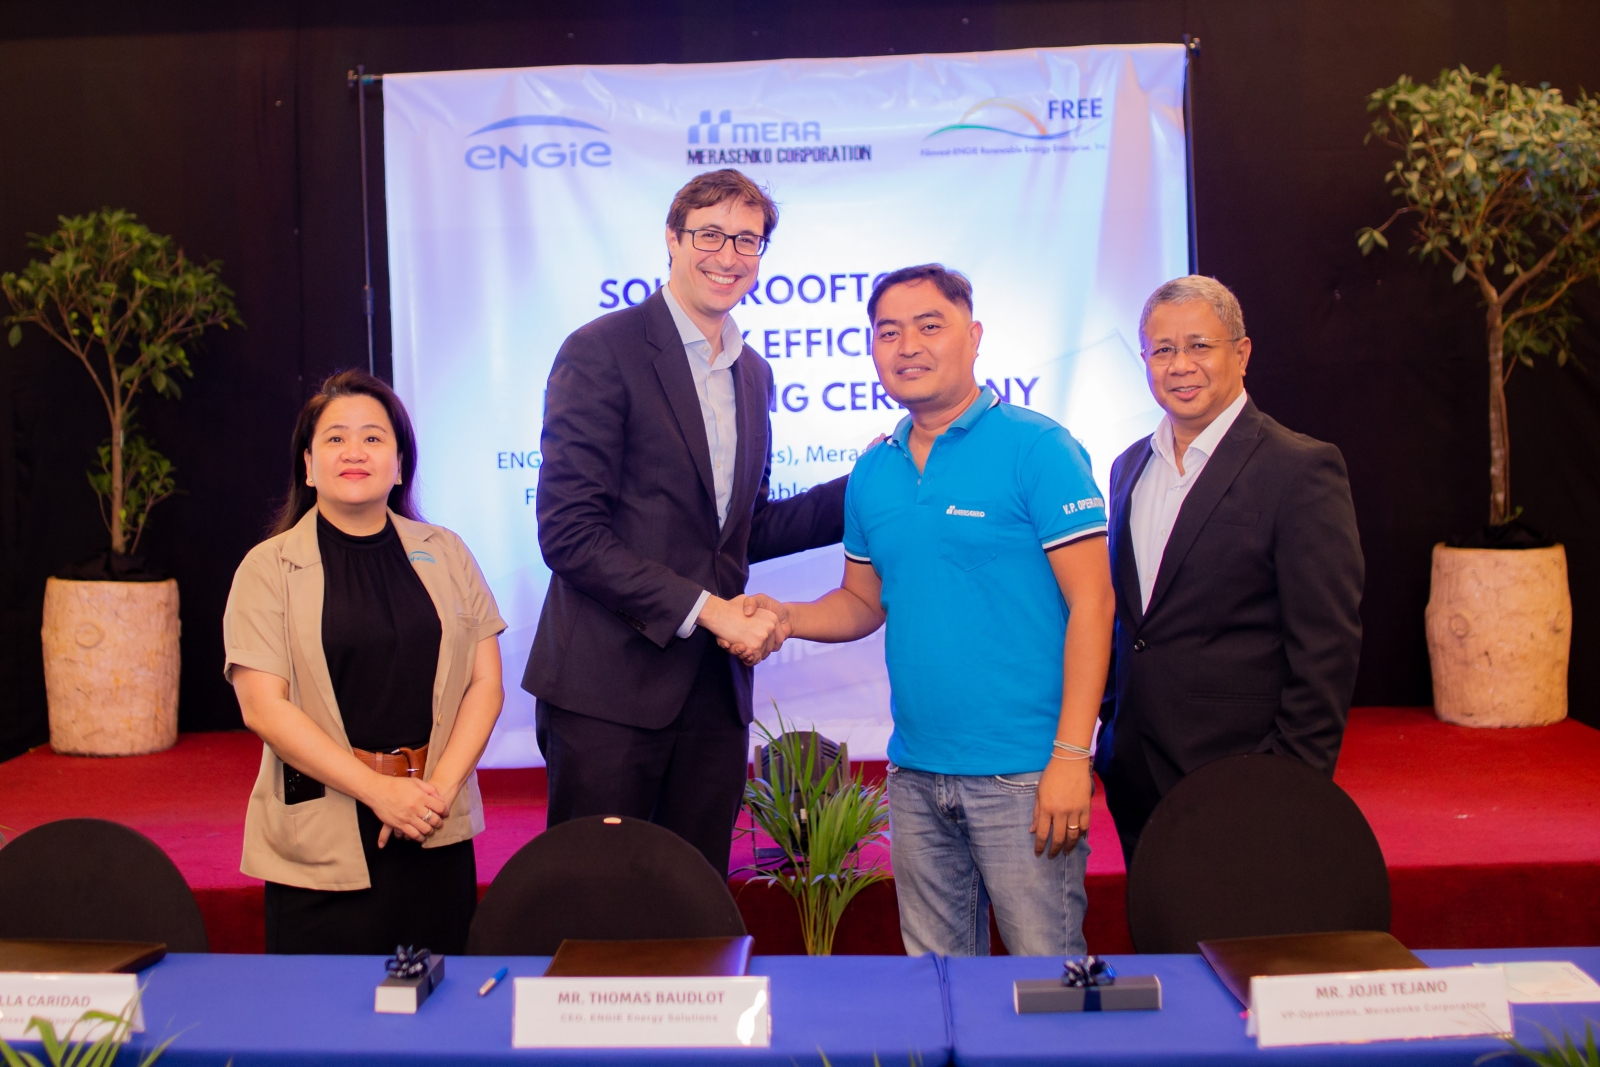 ENGIE, Filinvest and Merasenko have signed an MOU to collaborate on renewable energy and energy efficiency solutions for Merasenko’s project sites in the Philippines. (Left to right: Ms. Louella Caridad, General Manager, ENGIE Services Philippines, Mr. Thomas Baudlot, CEO Energy Solutions APAC, Country Head Southeast Asia, ENGIE South East Asia and Director of FREE, Engr. Jojie Tejano, VP Operations, Merasenko and Mr. Roderick Fernandez, VP for Corporate Planning and Project Development, FDCUI)